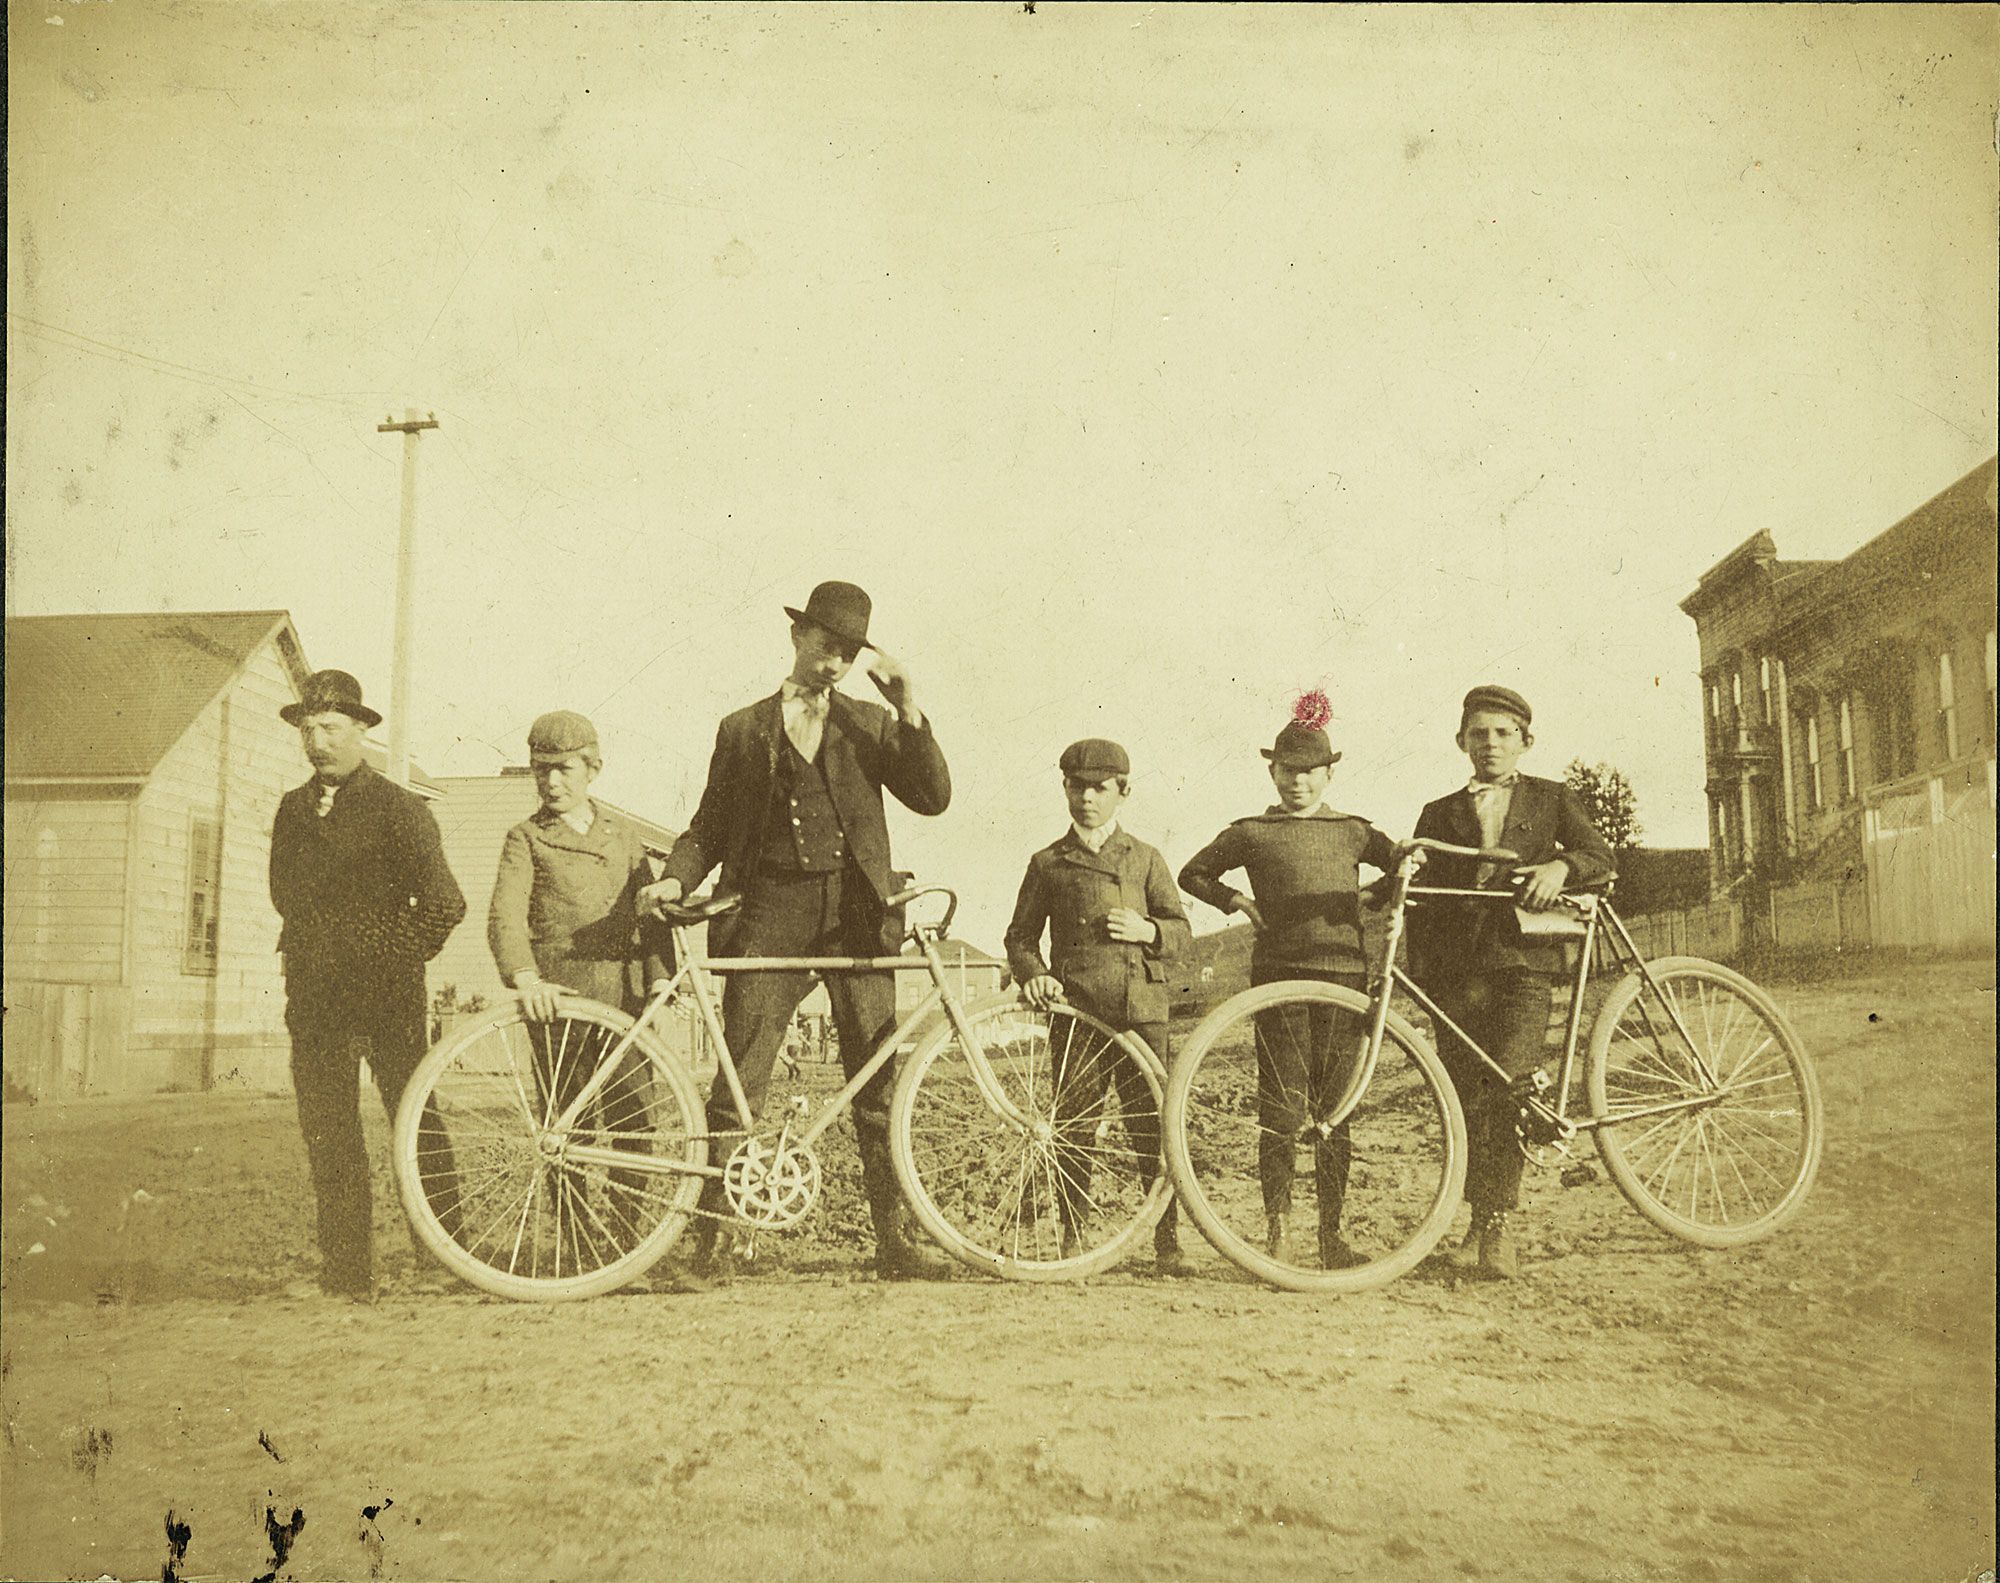 Boys with bicycles in early 1900s.